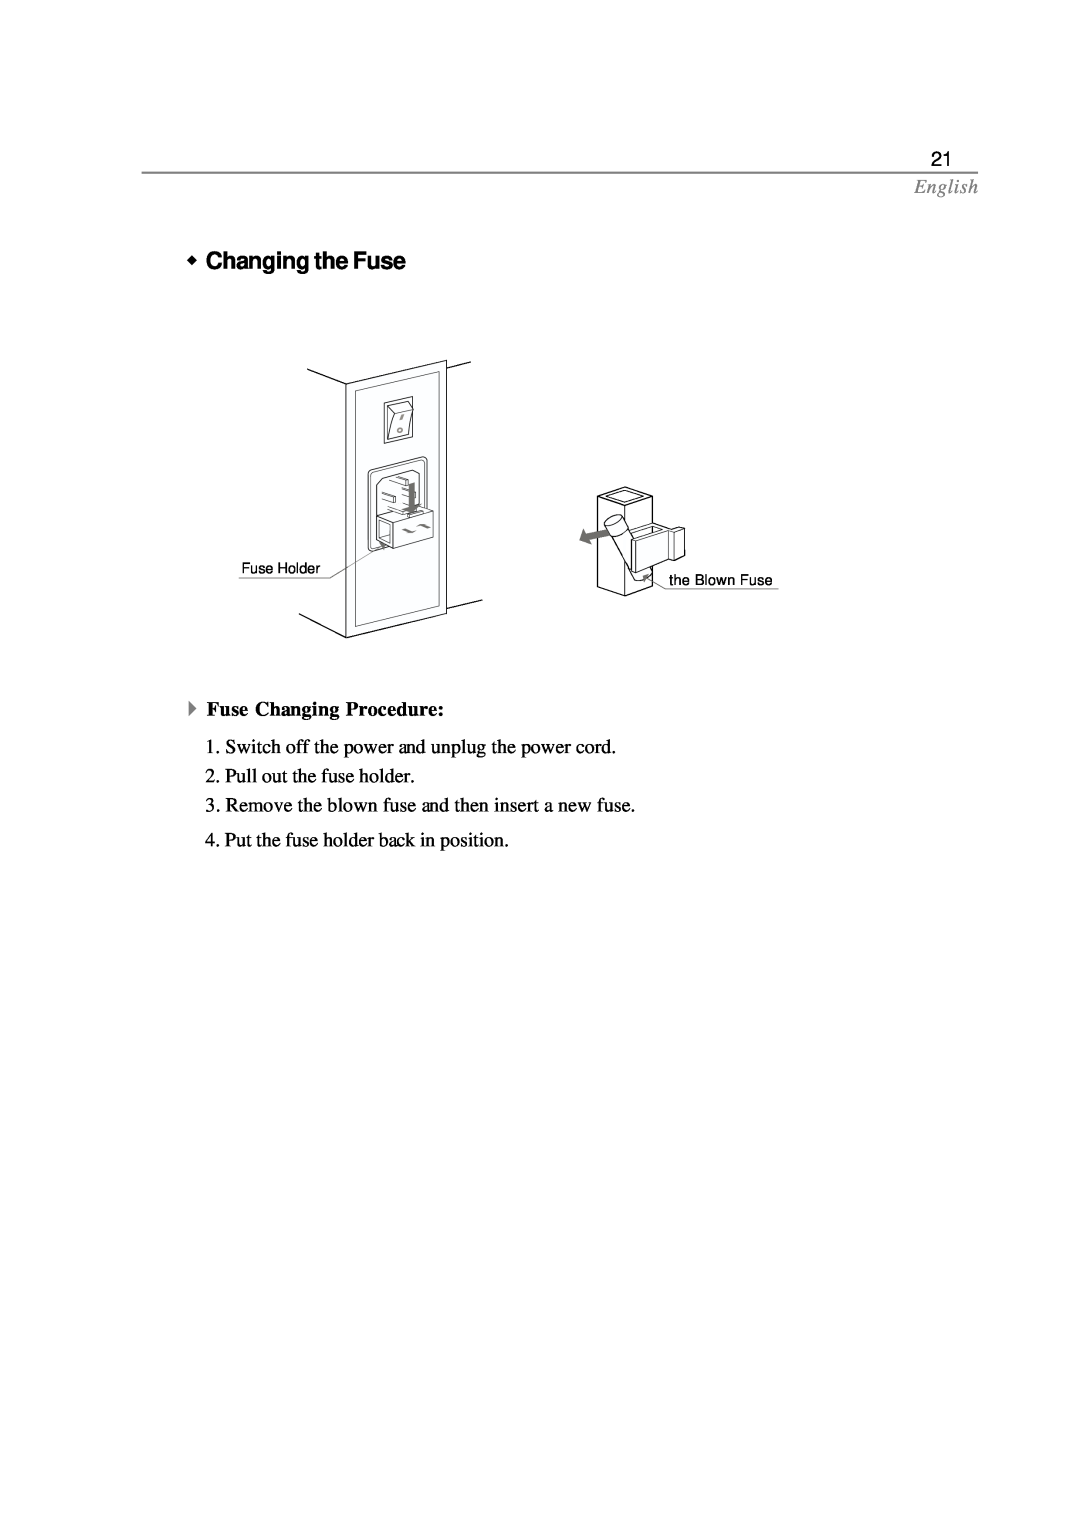 Optoma Technology EP585 specifications w Changing the Fuse, Fuse Changing Procedure, English, Fuse Holder the Blown Fuse 